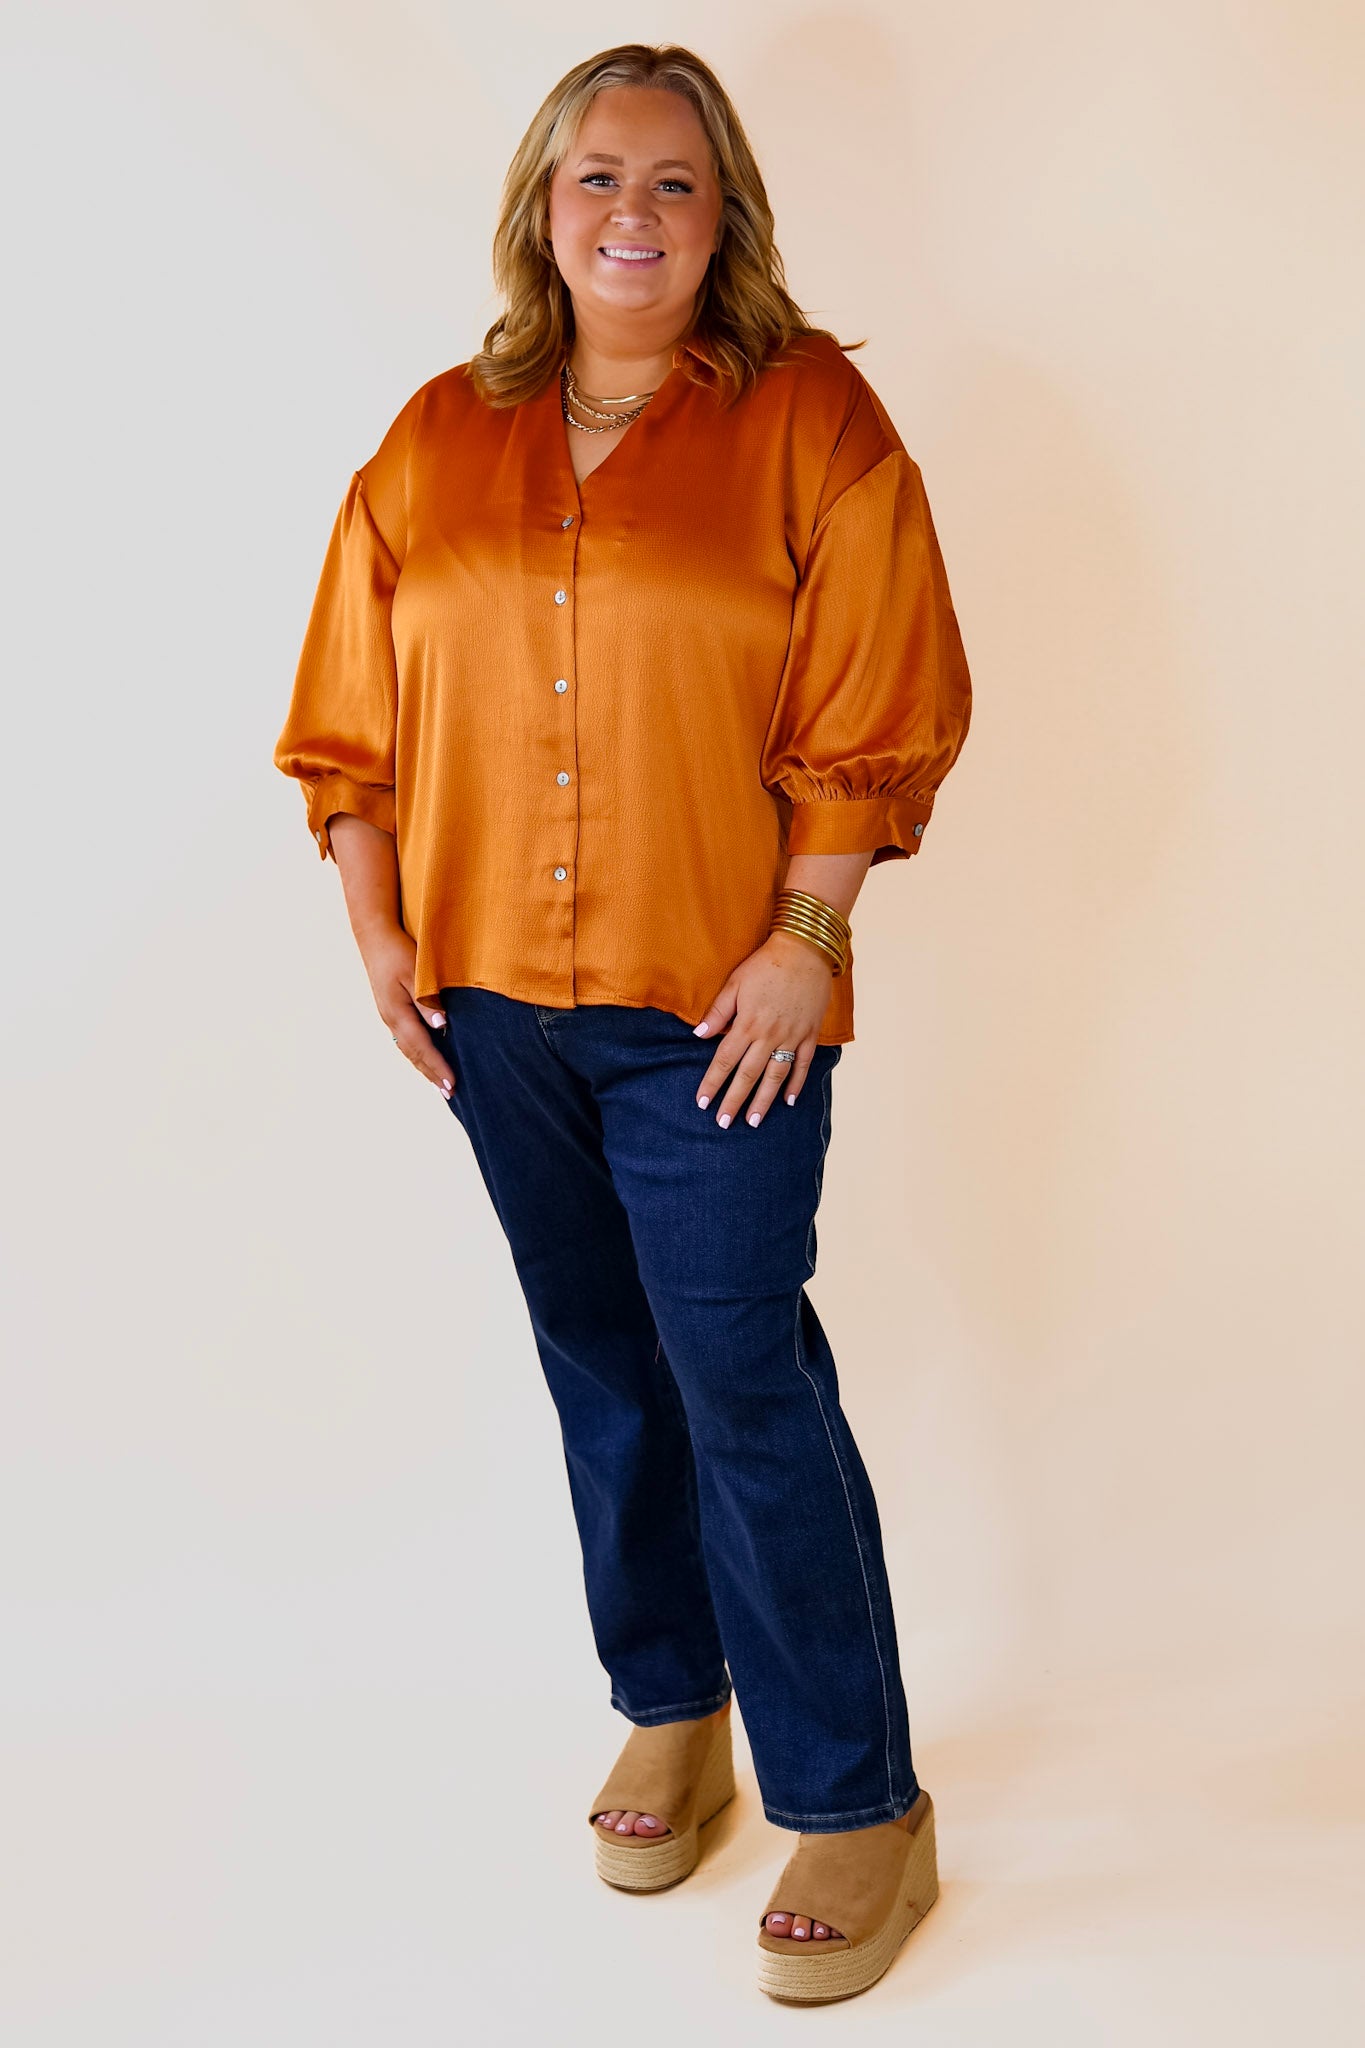 Sweet Notion Button Up 3/4 Balloon Sleeve Top in Pumpkin Orange - Giddy Up Glamour Boutique